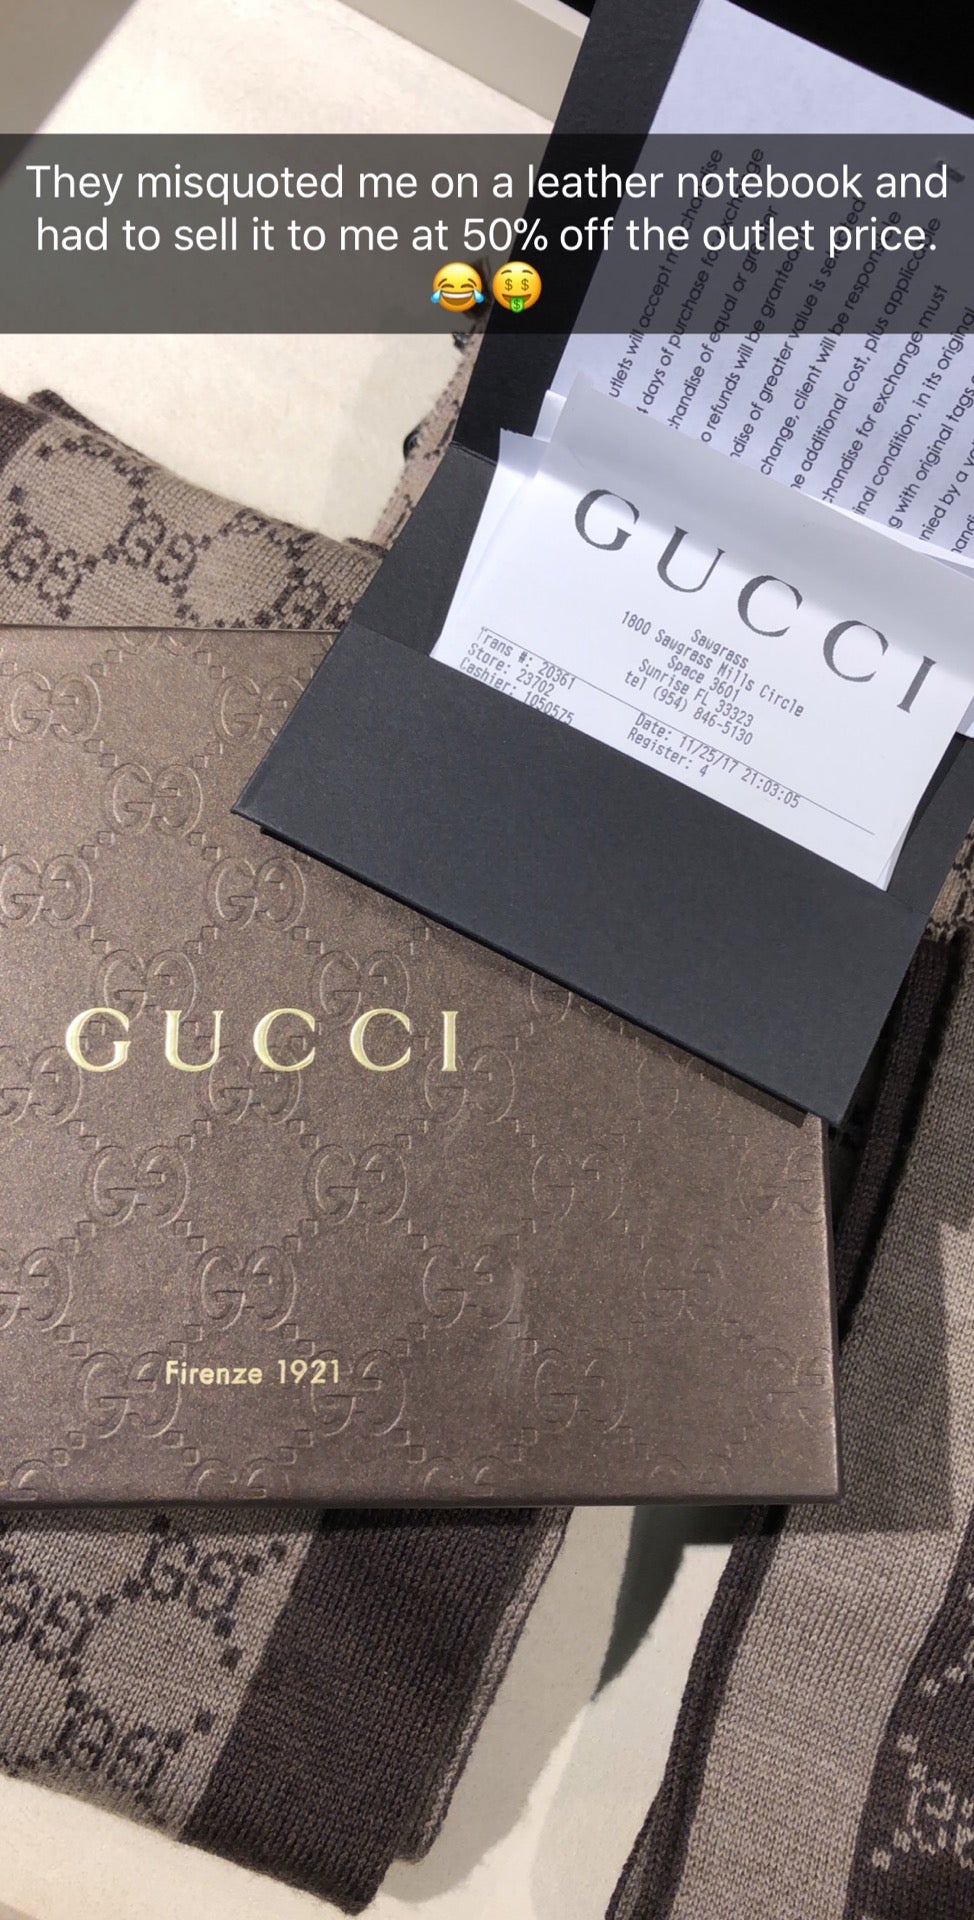 Gucci Sawgrass Outlet, 1700 Sawgrass Mills Circle, Suite 3601